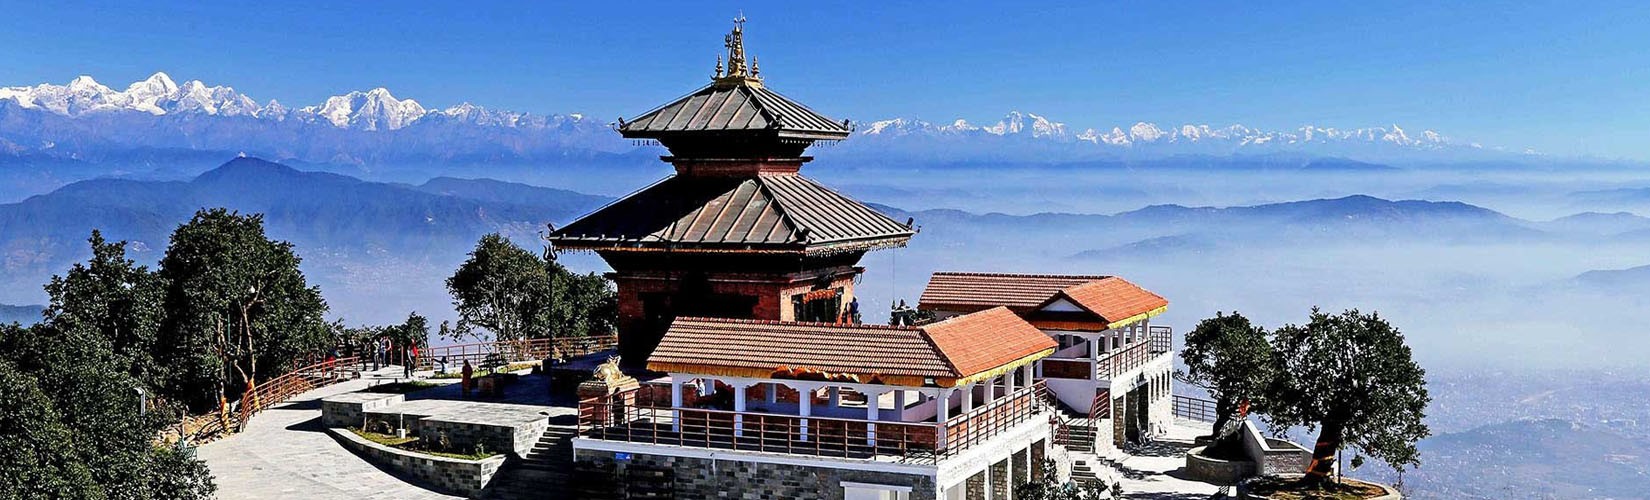 Education Tour in Nepal | Reasonable Treks And Tour 